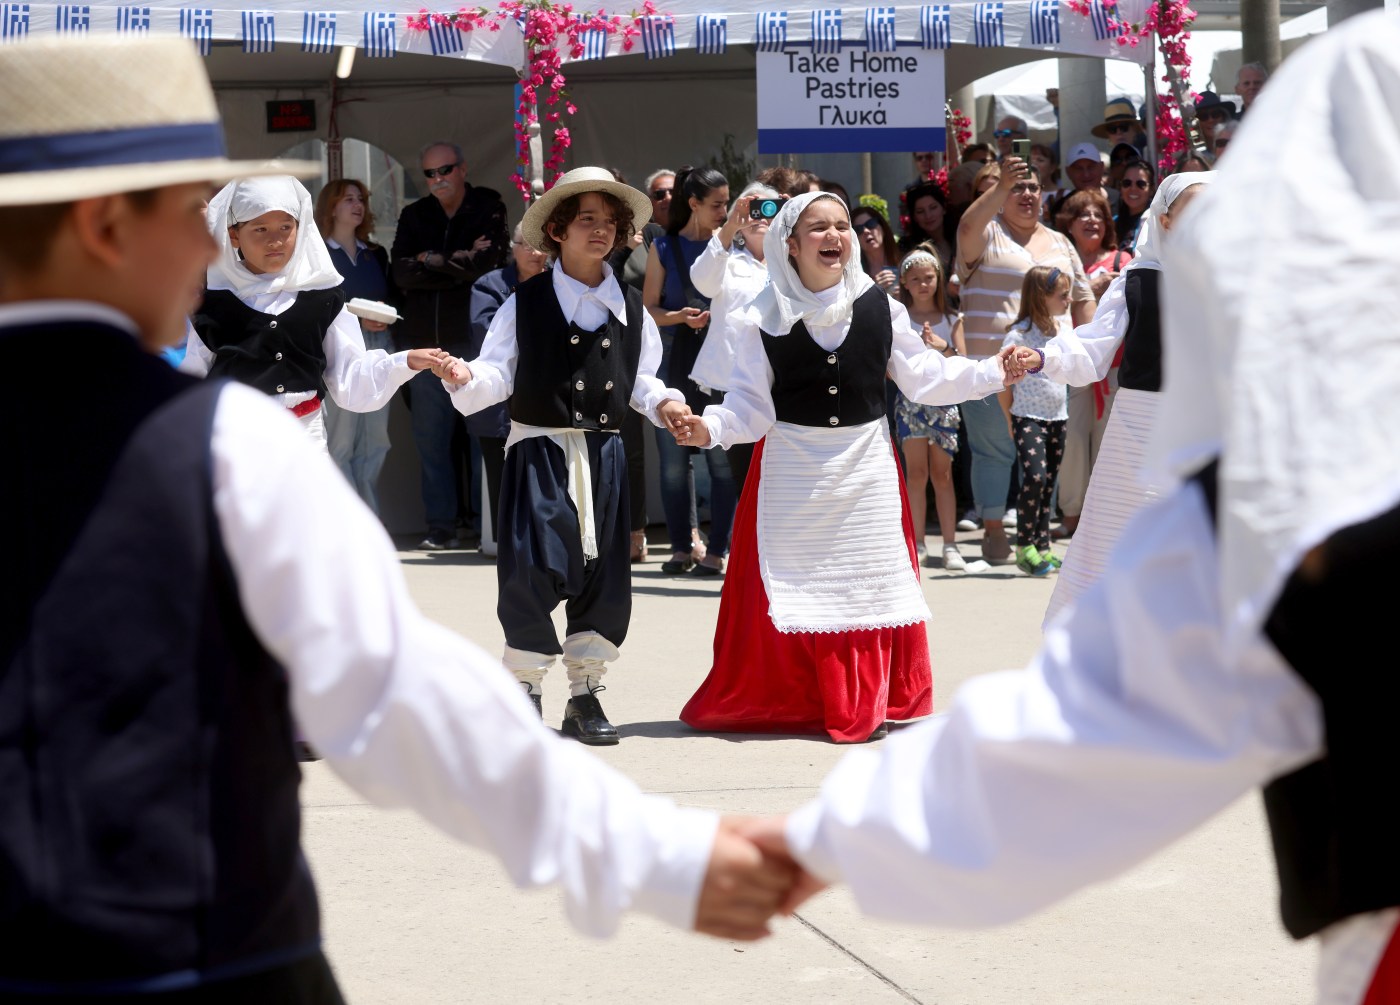 photos:-oakland-greek-festival-draws-thousands-to-celebrate-culture,-food-and-music